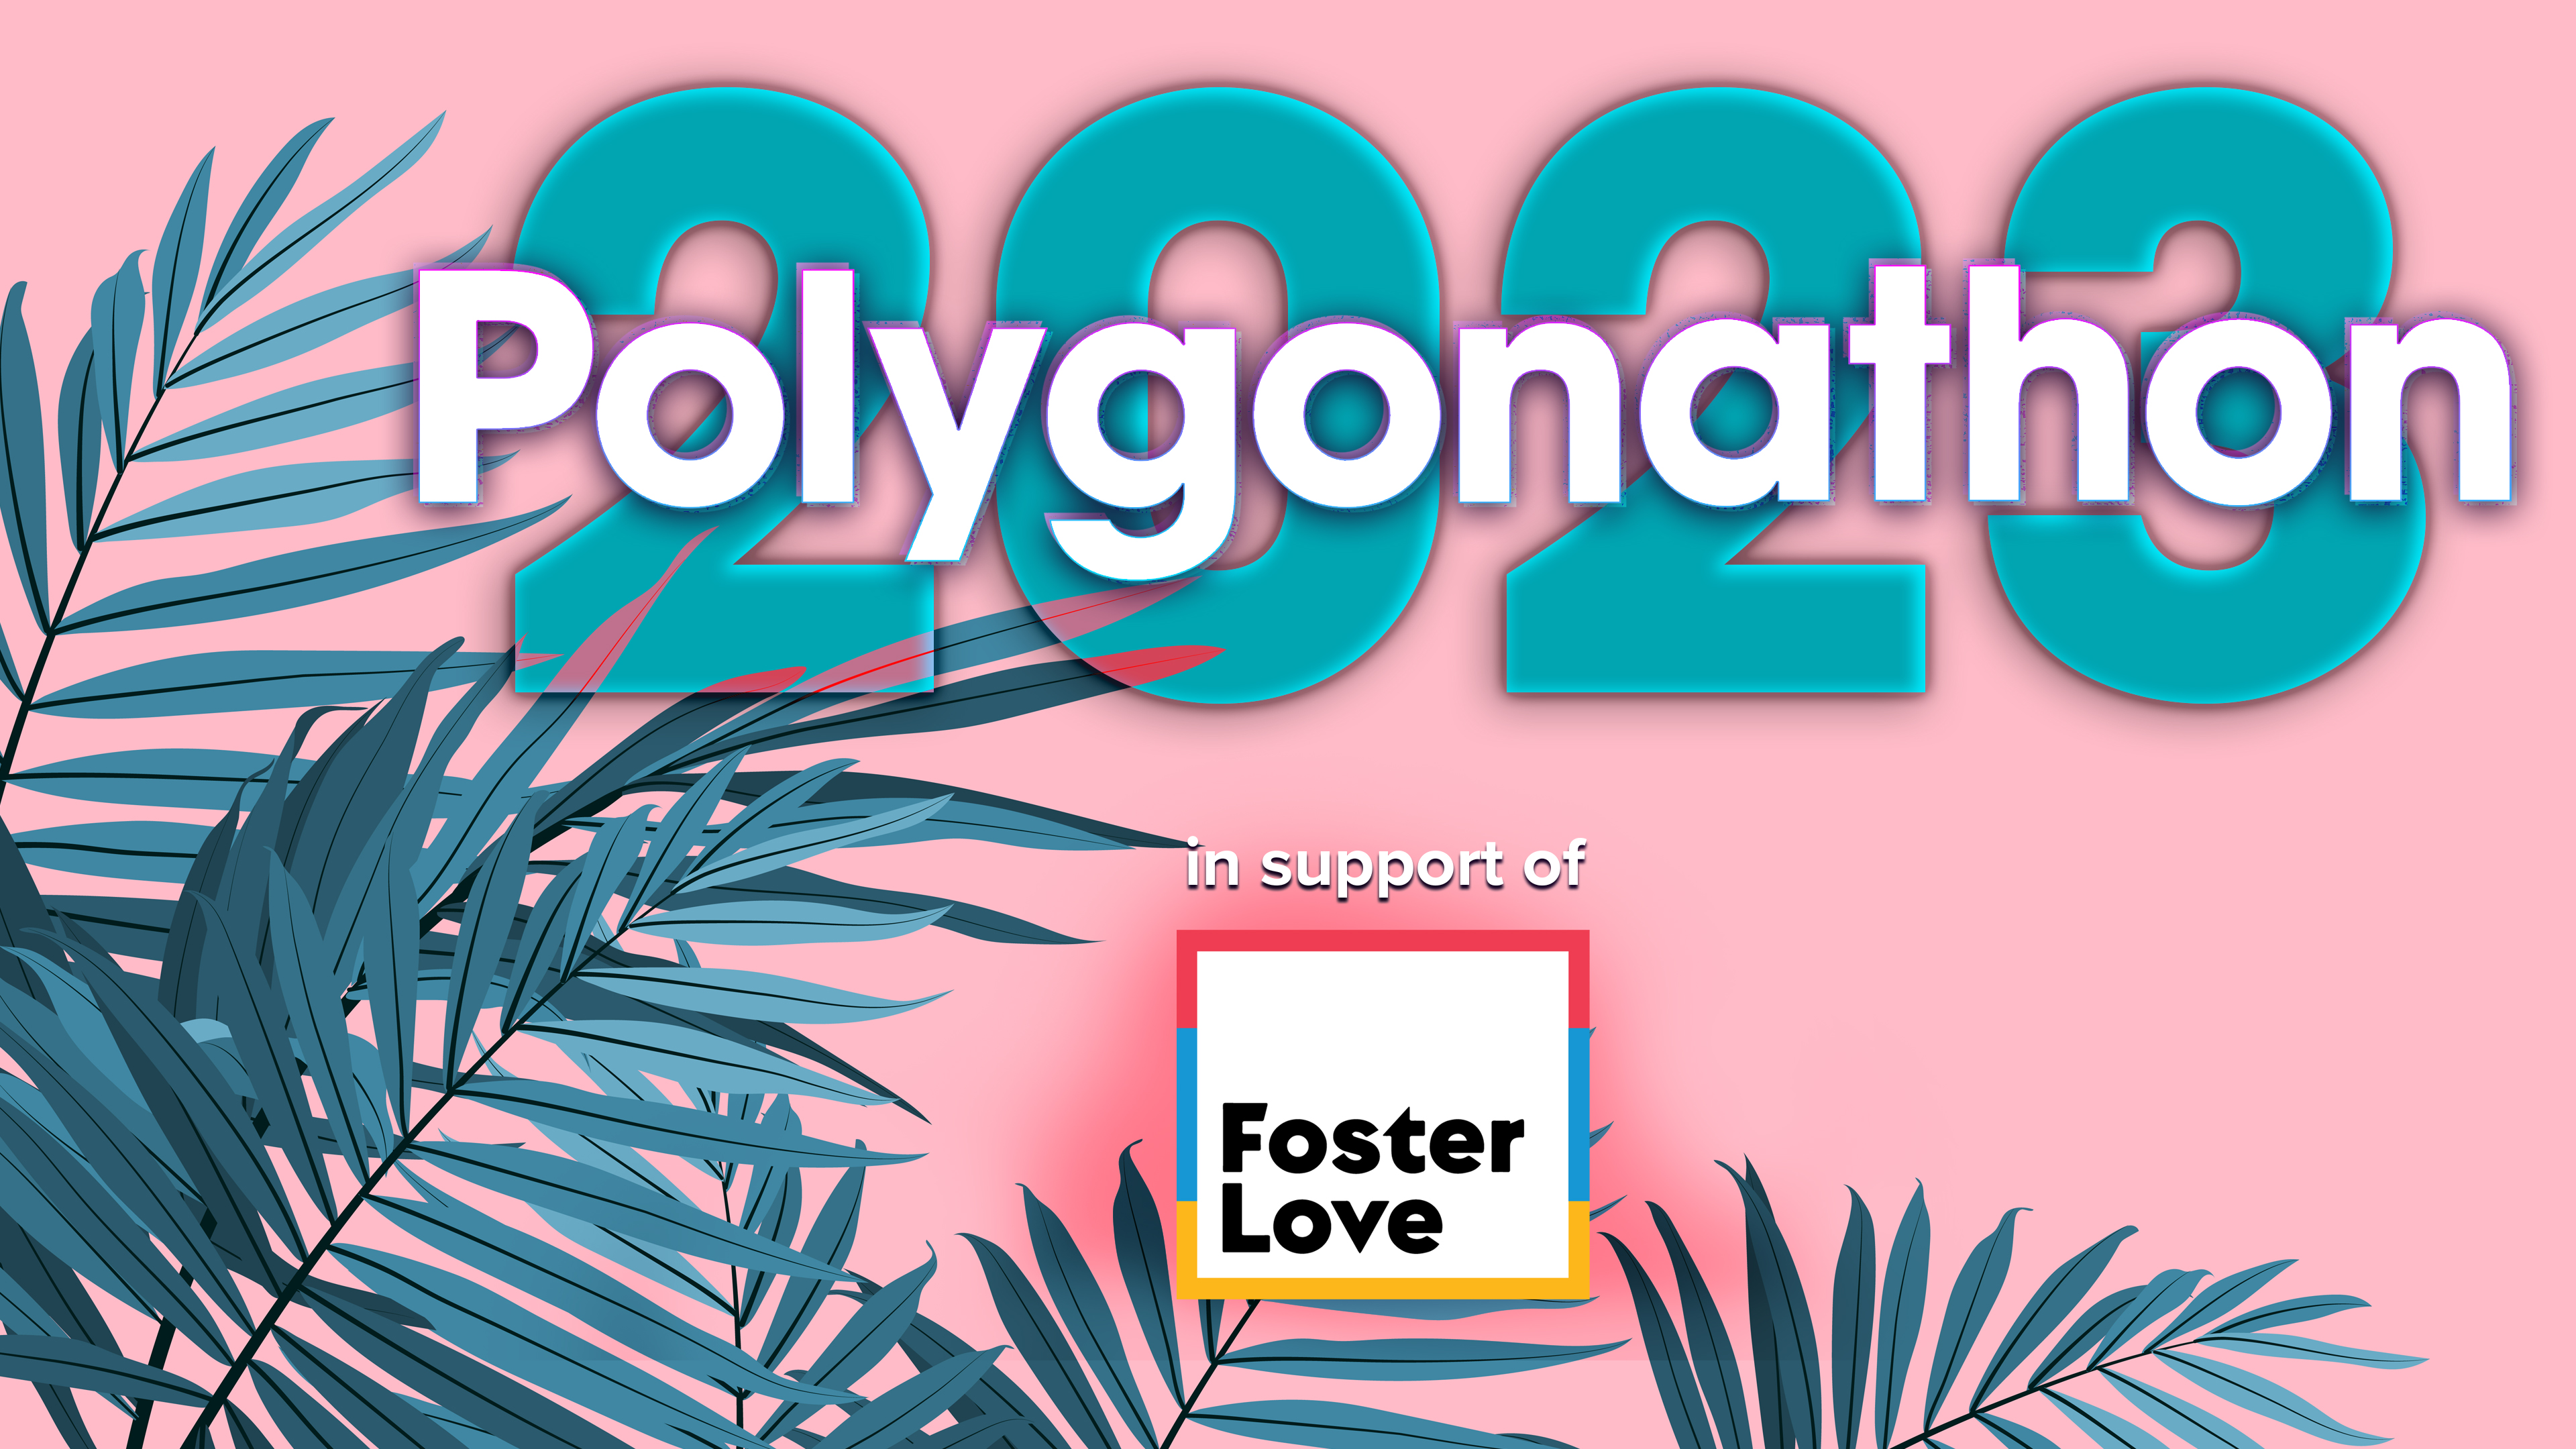 A logo reading Polygonathon 2023 on a pink background with green leaves poking into the frame. Underneath, the text reads “In support of Foster Love.”